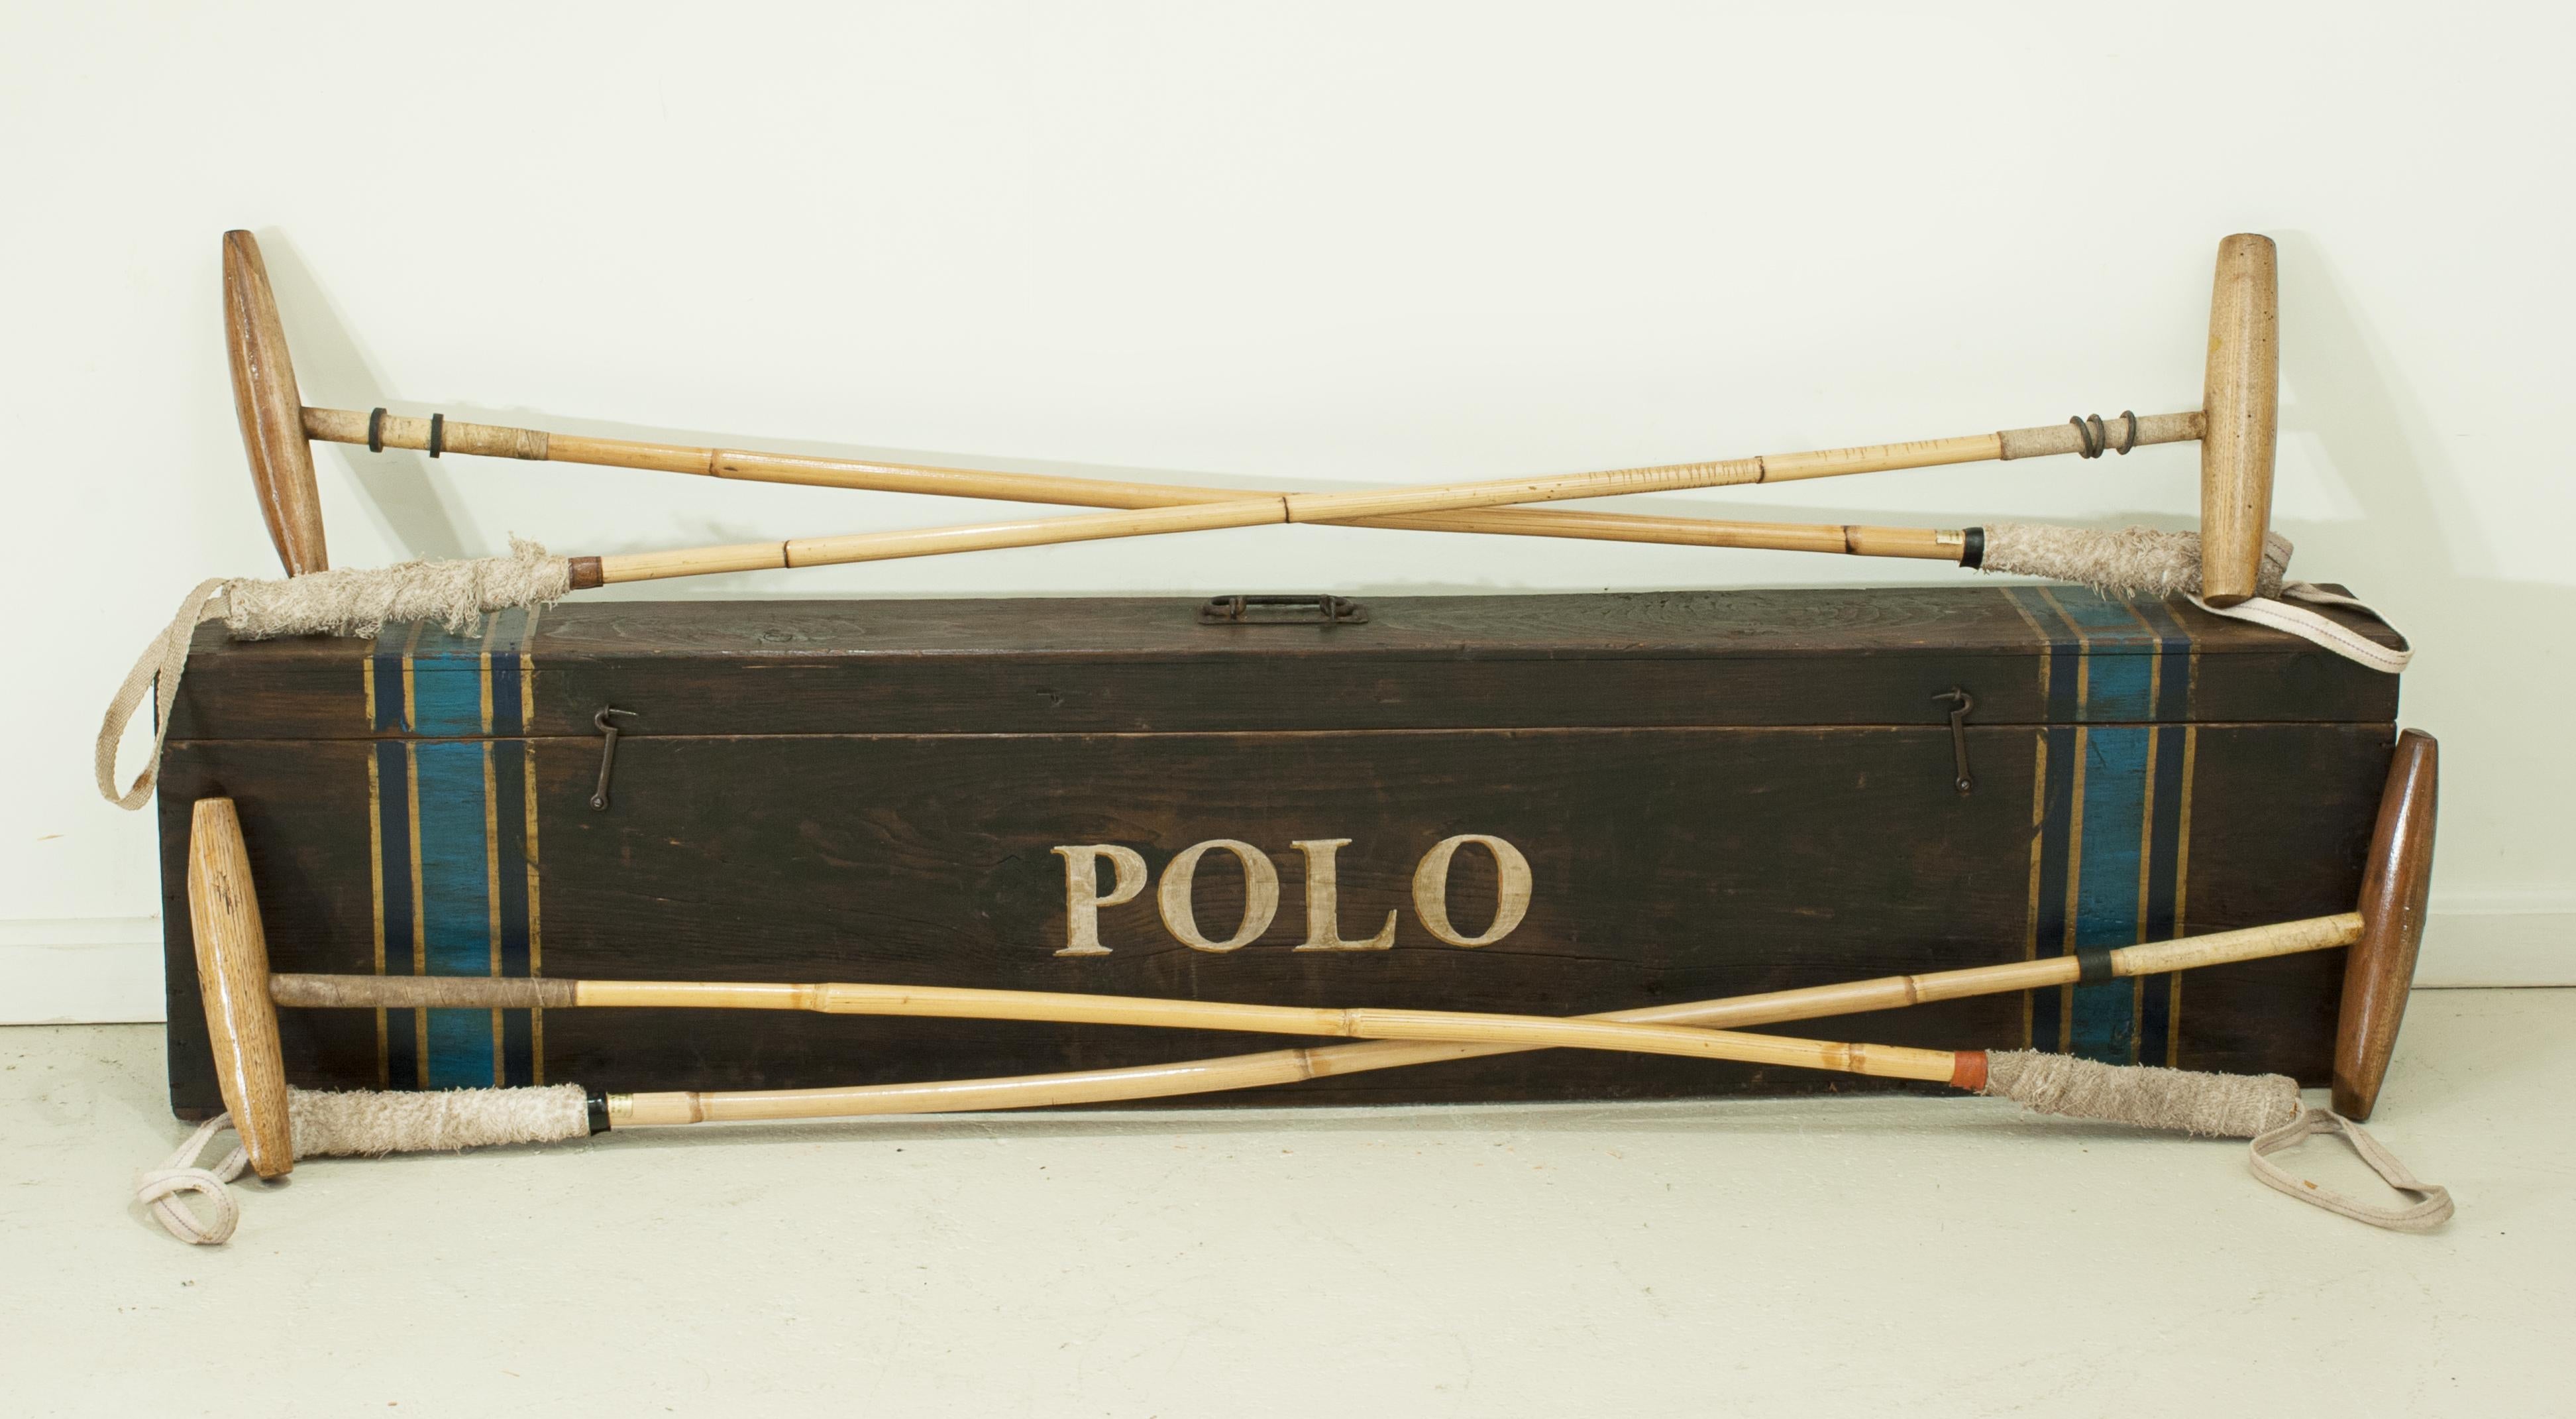 Vintage Polo mallet box.
A good sturdy polo mallet carry box. The box is made of pine with one metal carry handle and two catch hooks. The box has been newly refurbished with the colour bands and the 'POLO' inscription to the front. The box comes